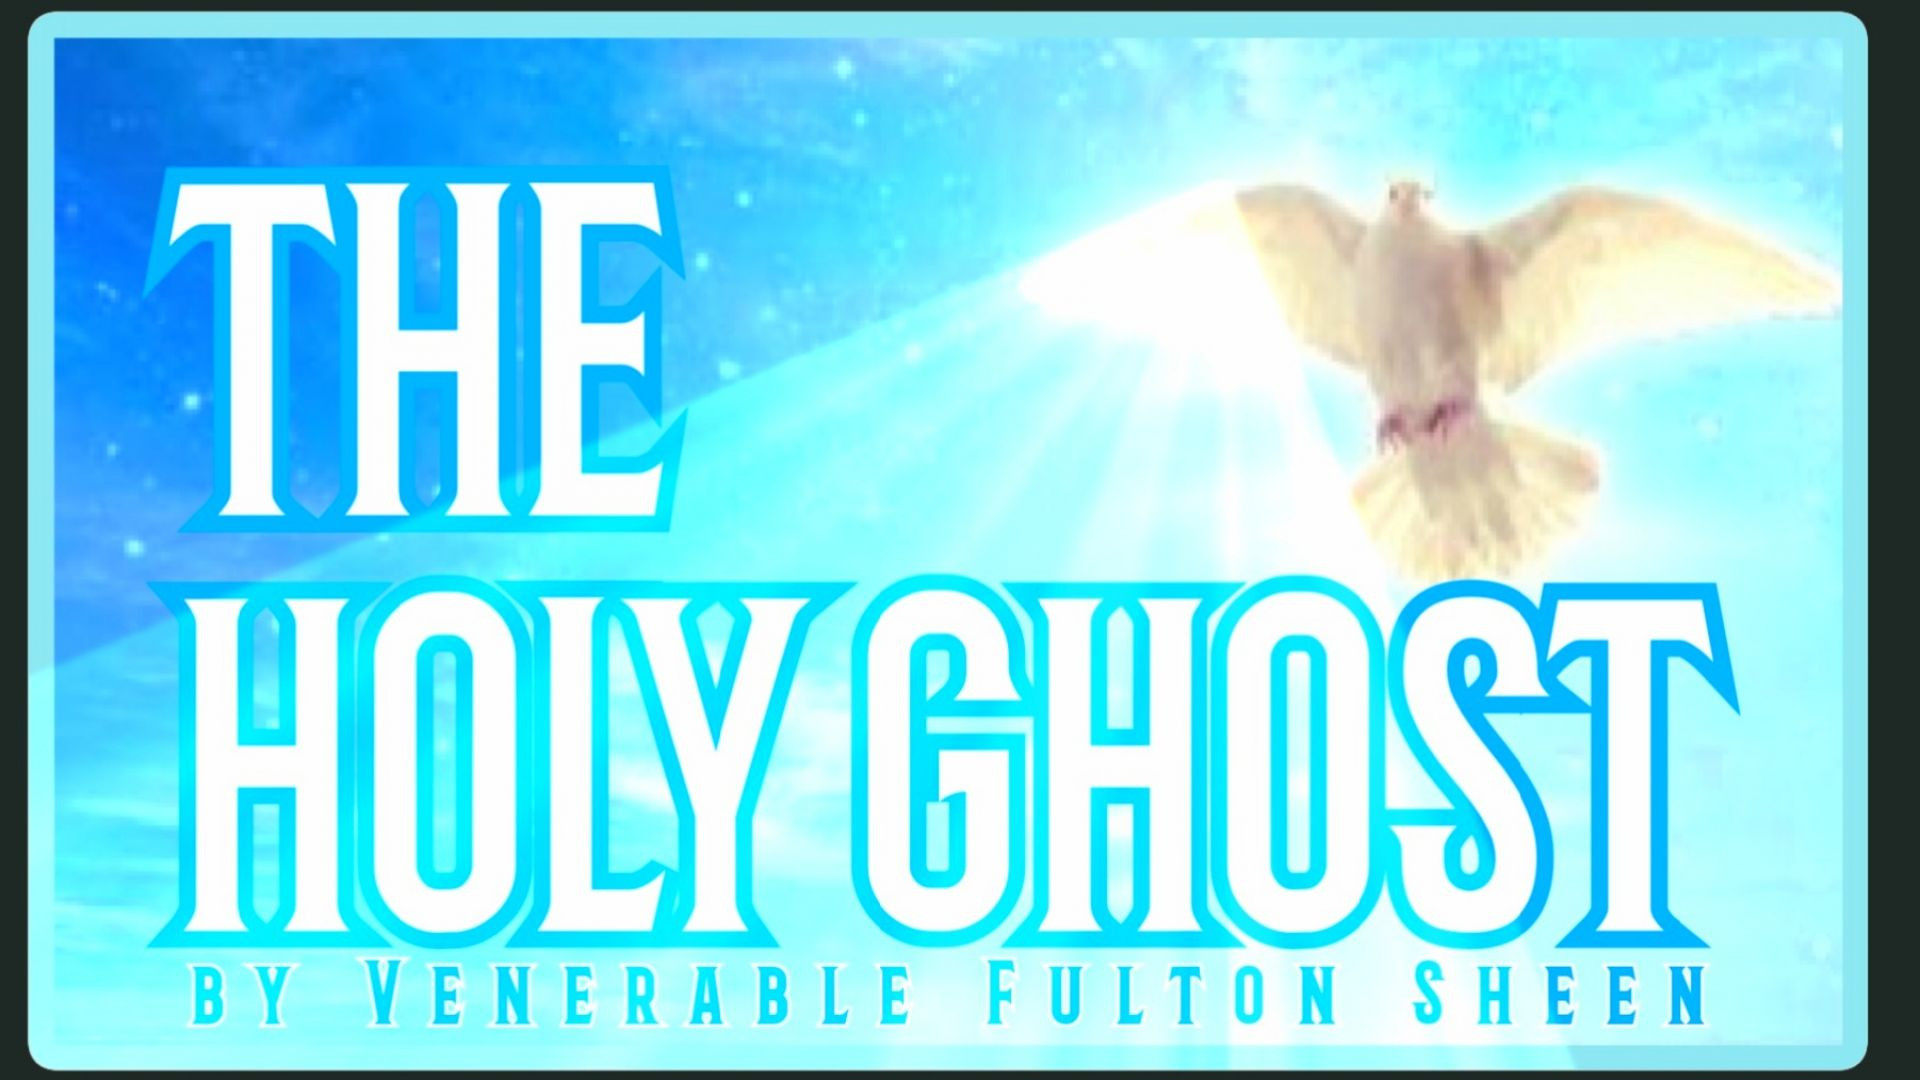 THE HOLY GHOST BY VENERABLE FULTON SHEEN (AUDIO)